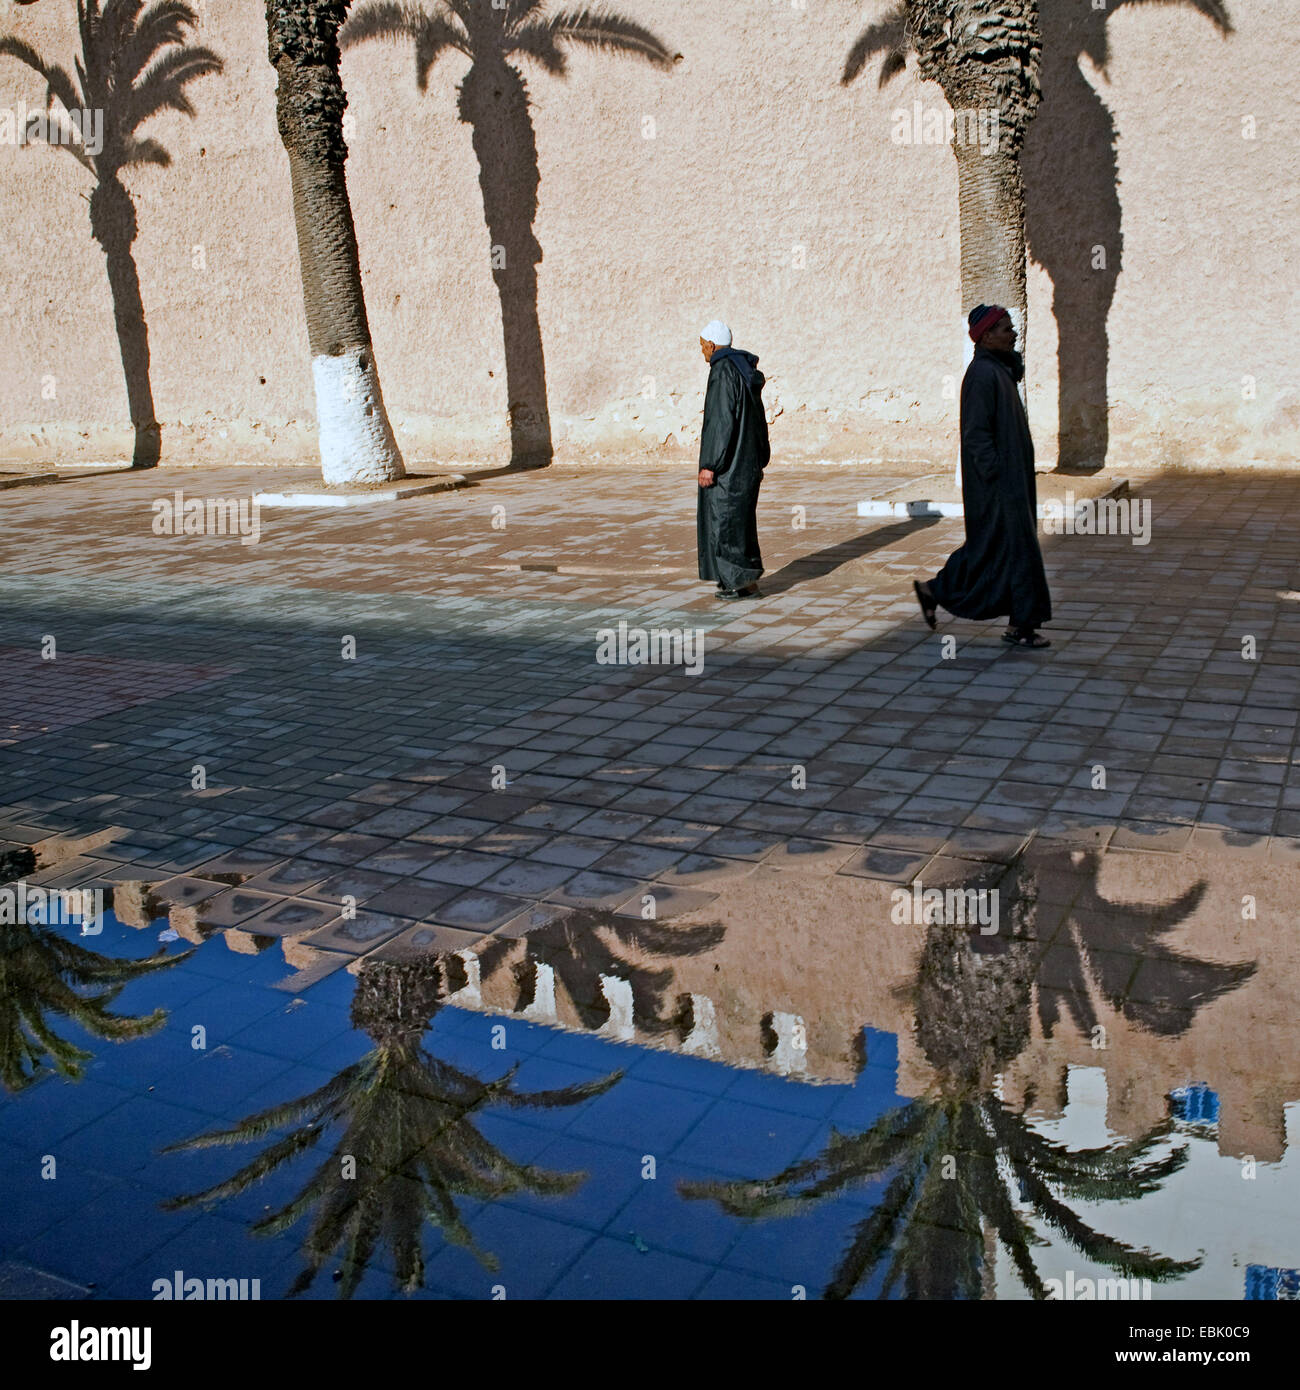 pedestrians an historical town wall reflecting in puddle of water after a ain shower, Morocco, Essaouira Stock Photo